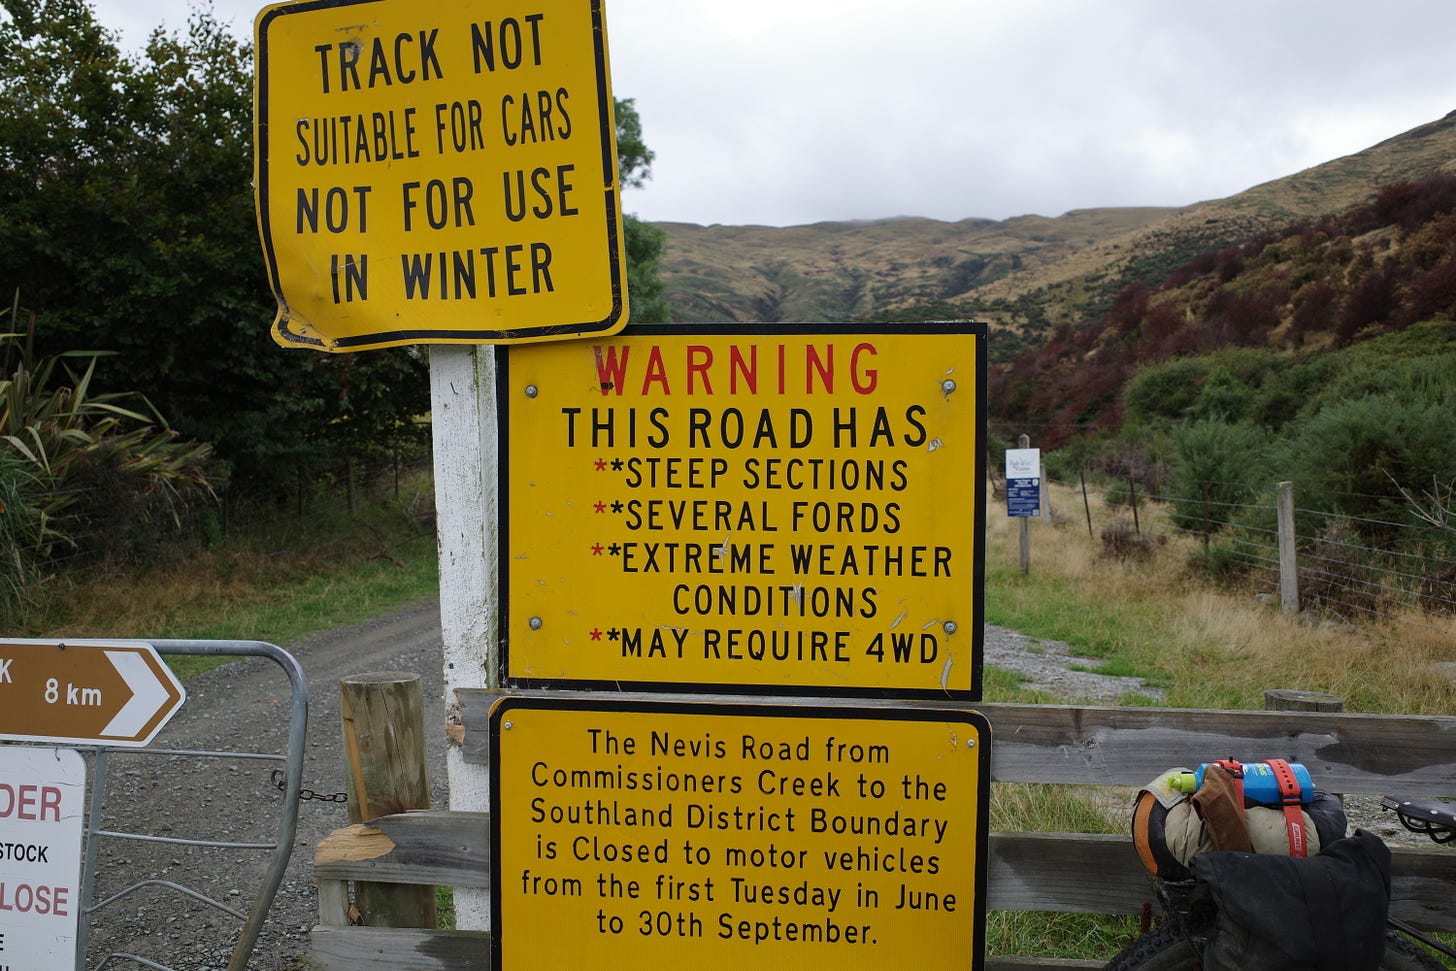 A warning sign: "This road has steep sections, several fords, extreme weather conditions, may require 4wd".